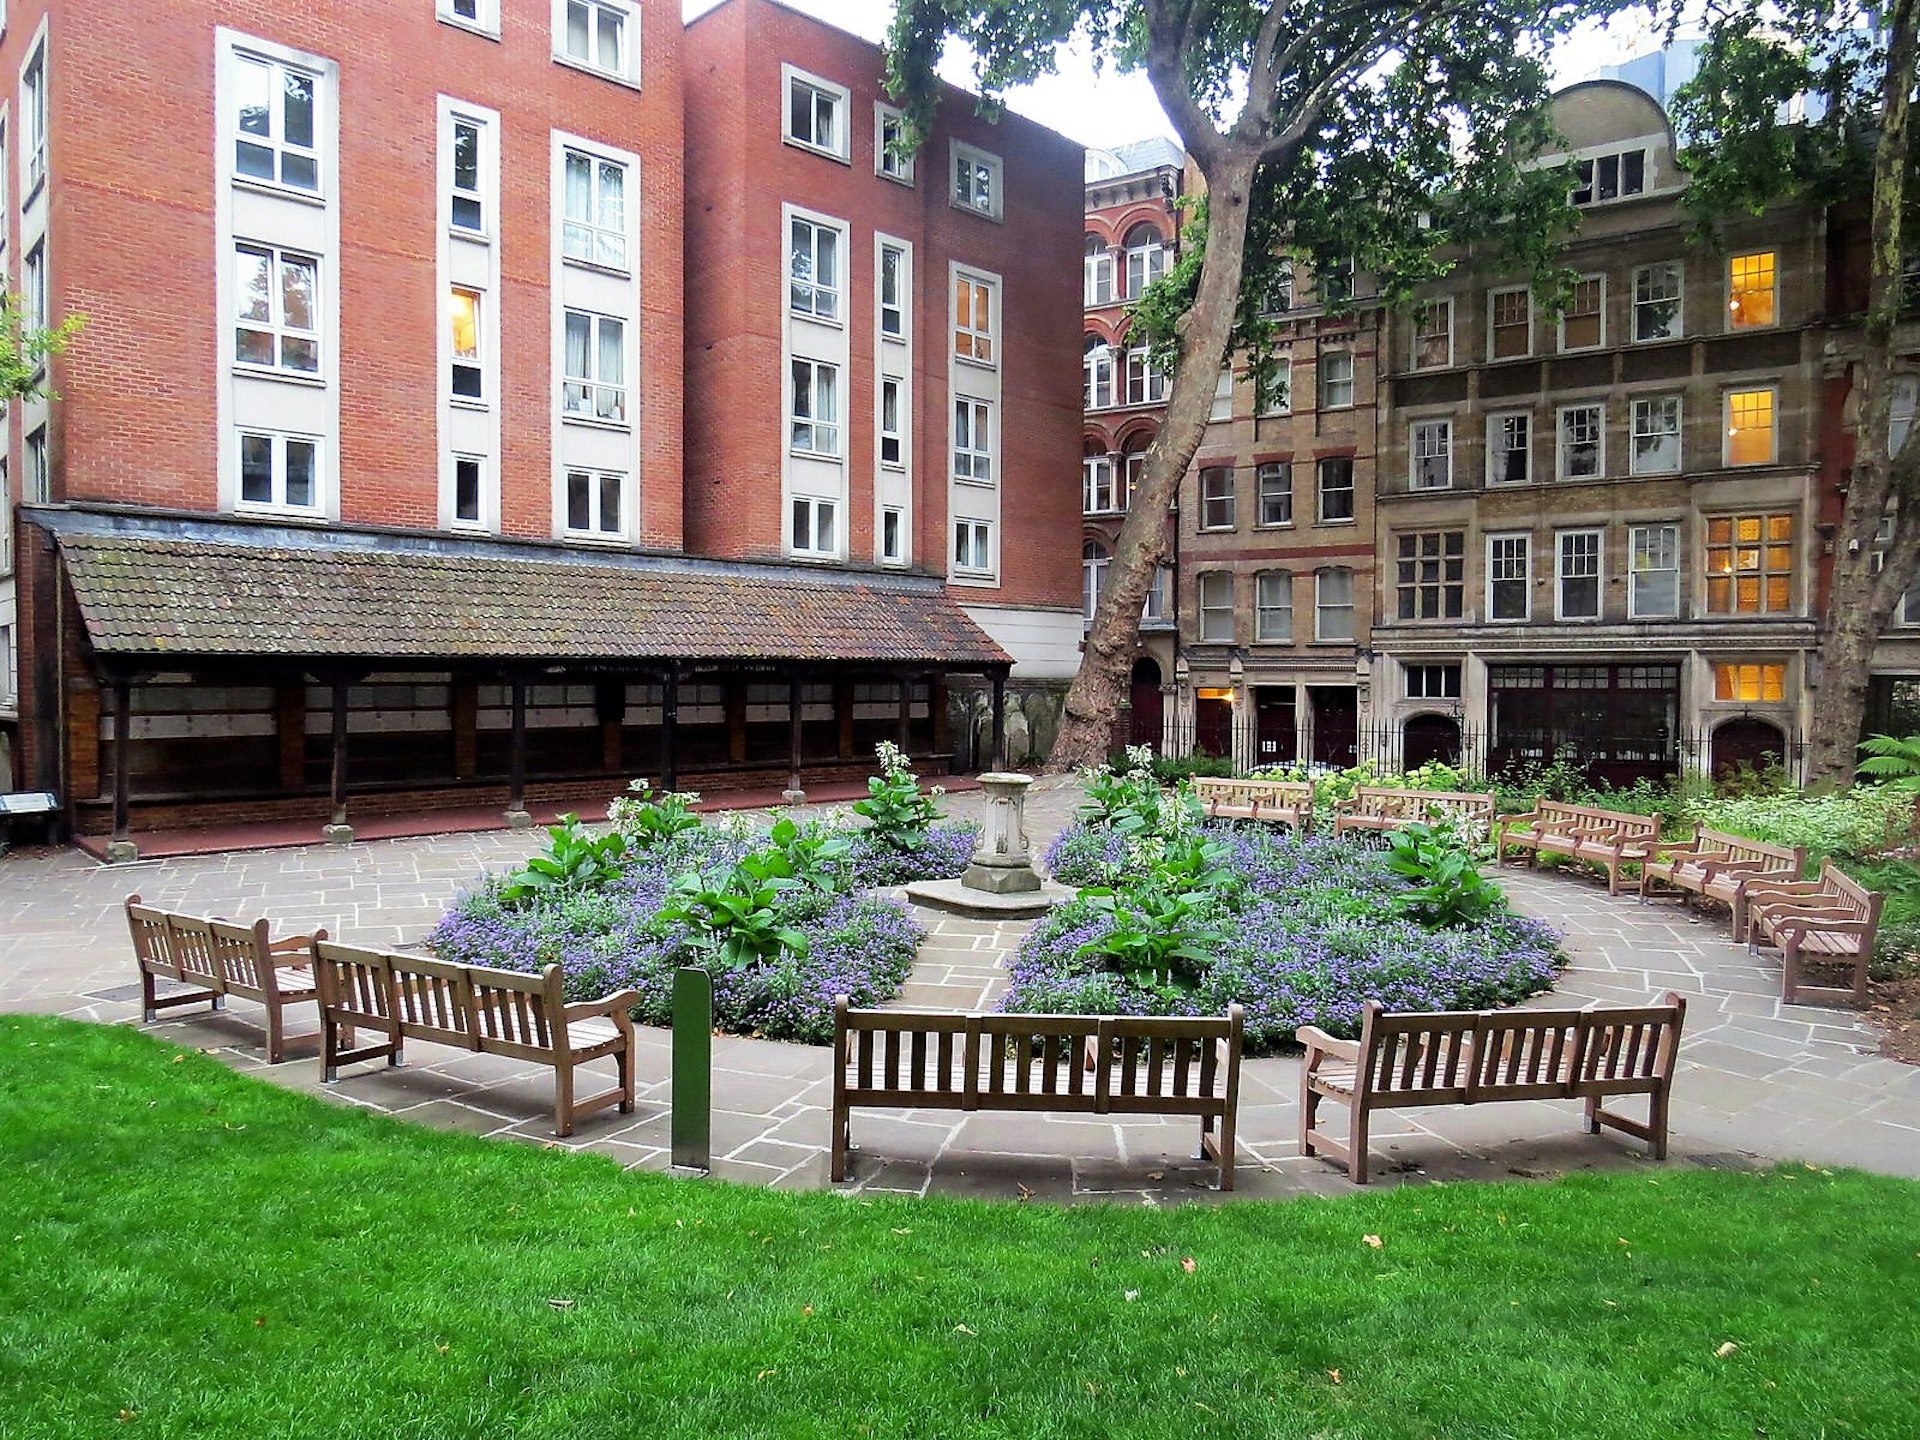 The Postman's Park in central London.